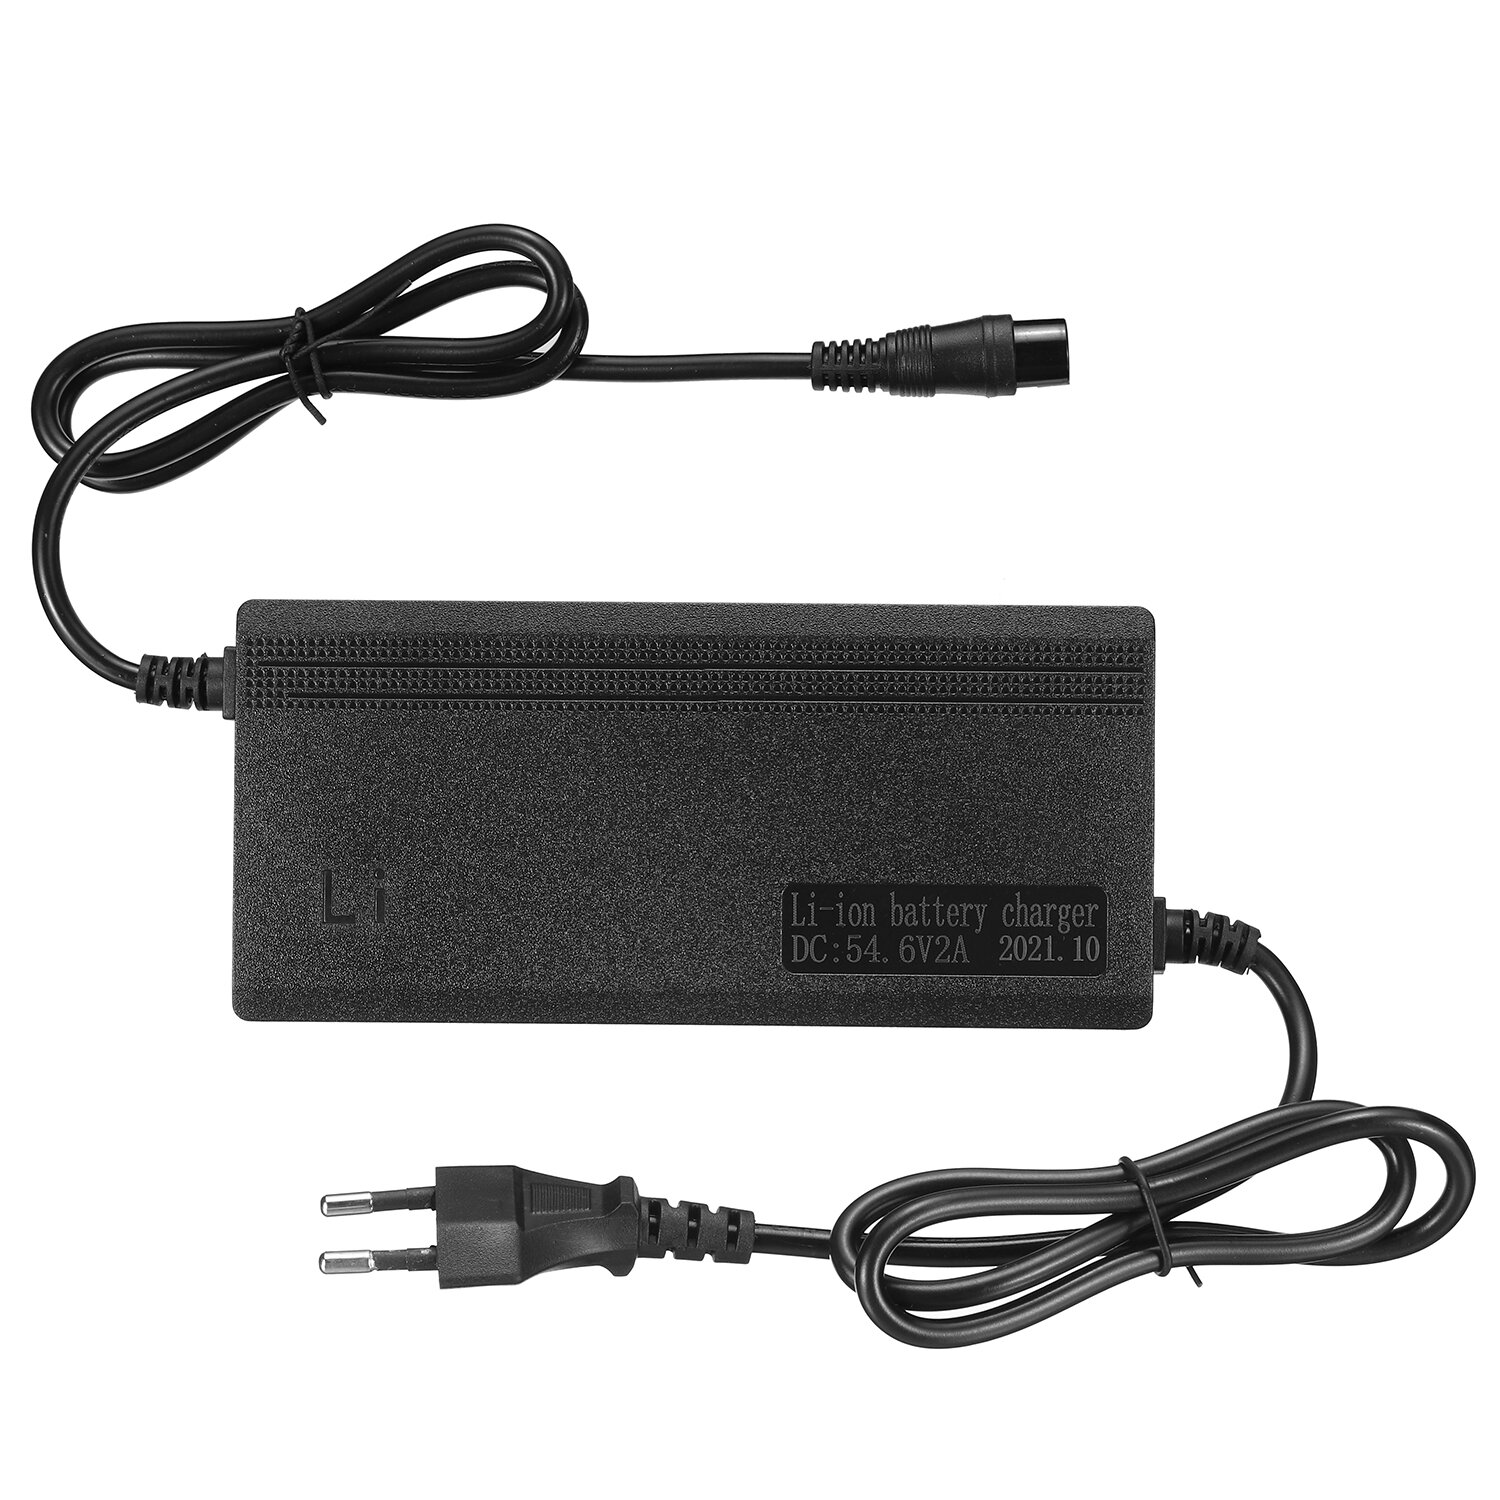 LAOTIE 48V Electric Scooter Charger For L6 Pro